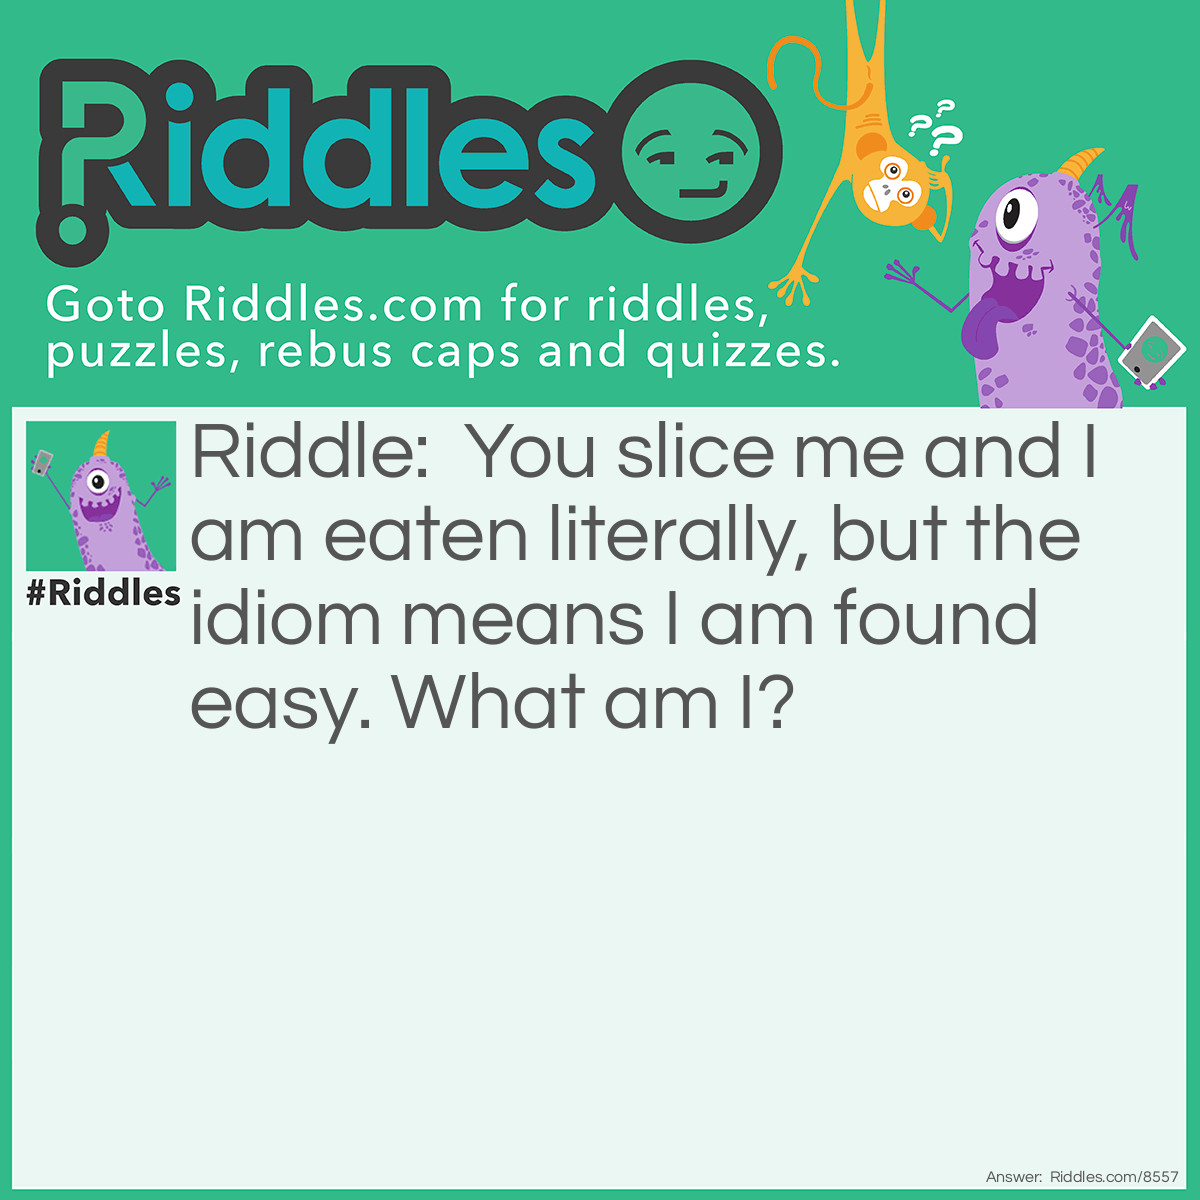 Riddle: You slice me and I am eaten literally, but the idiom means I am found easy. What am I? Answer: A piece of cake!